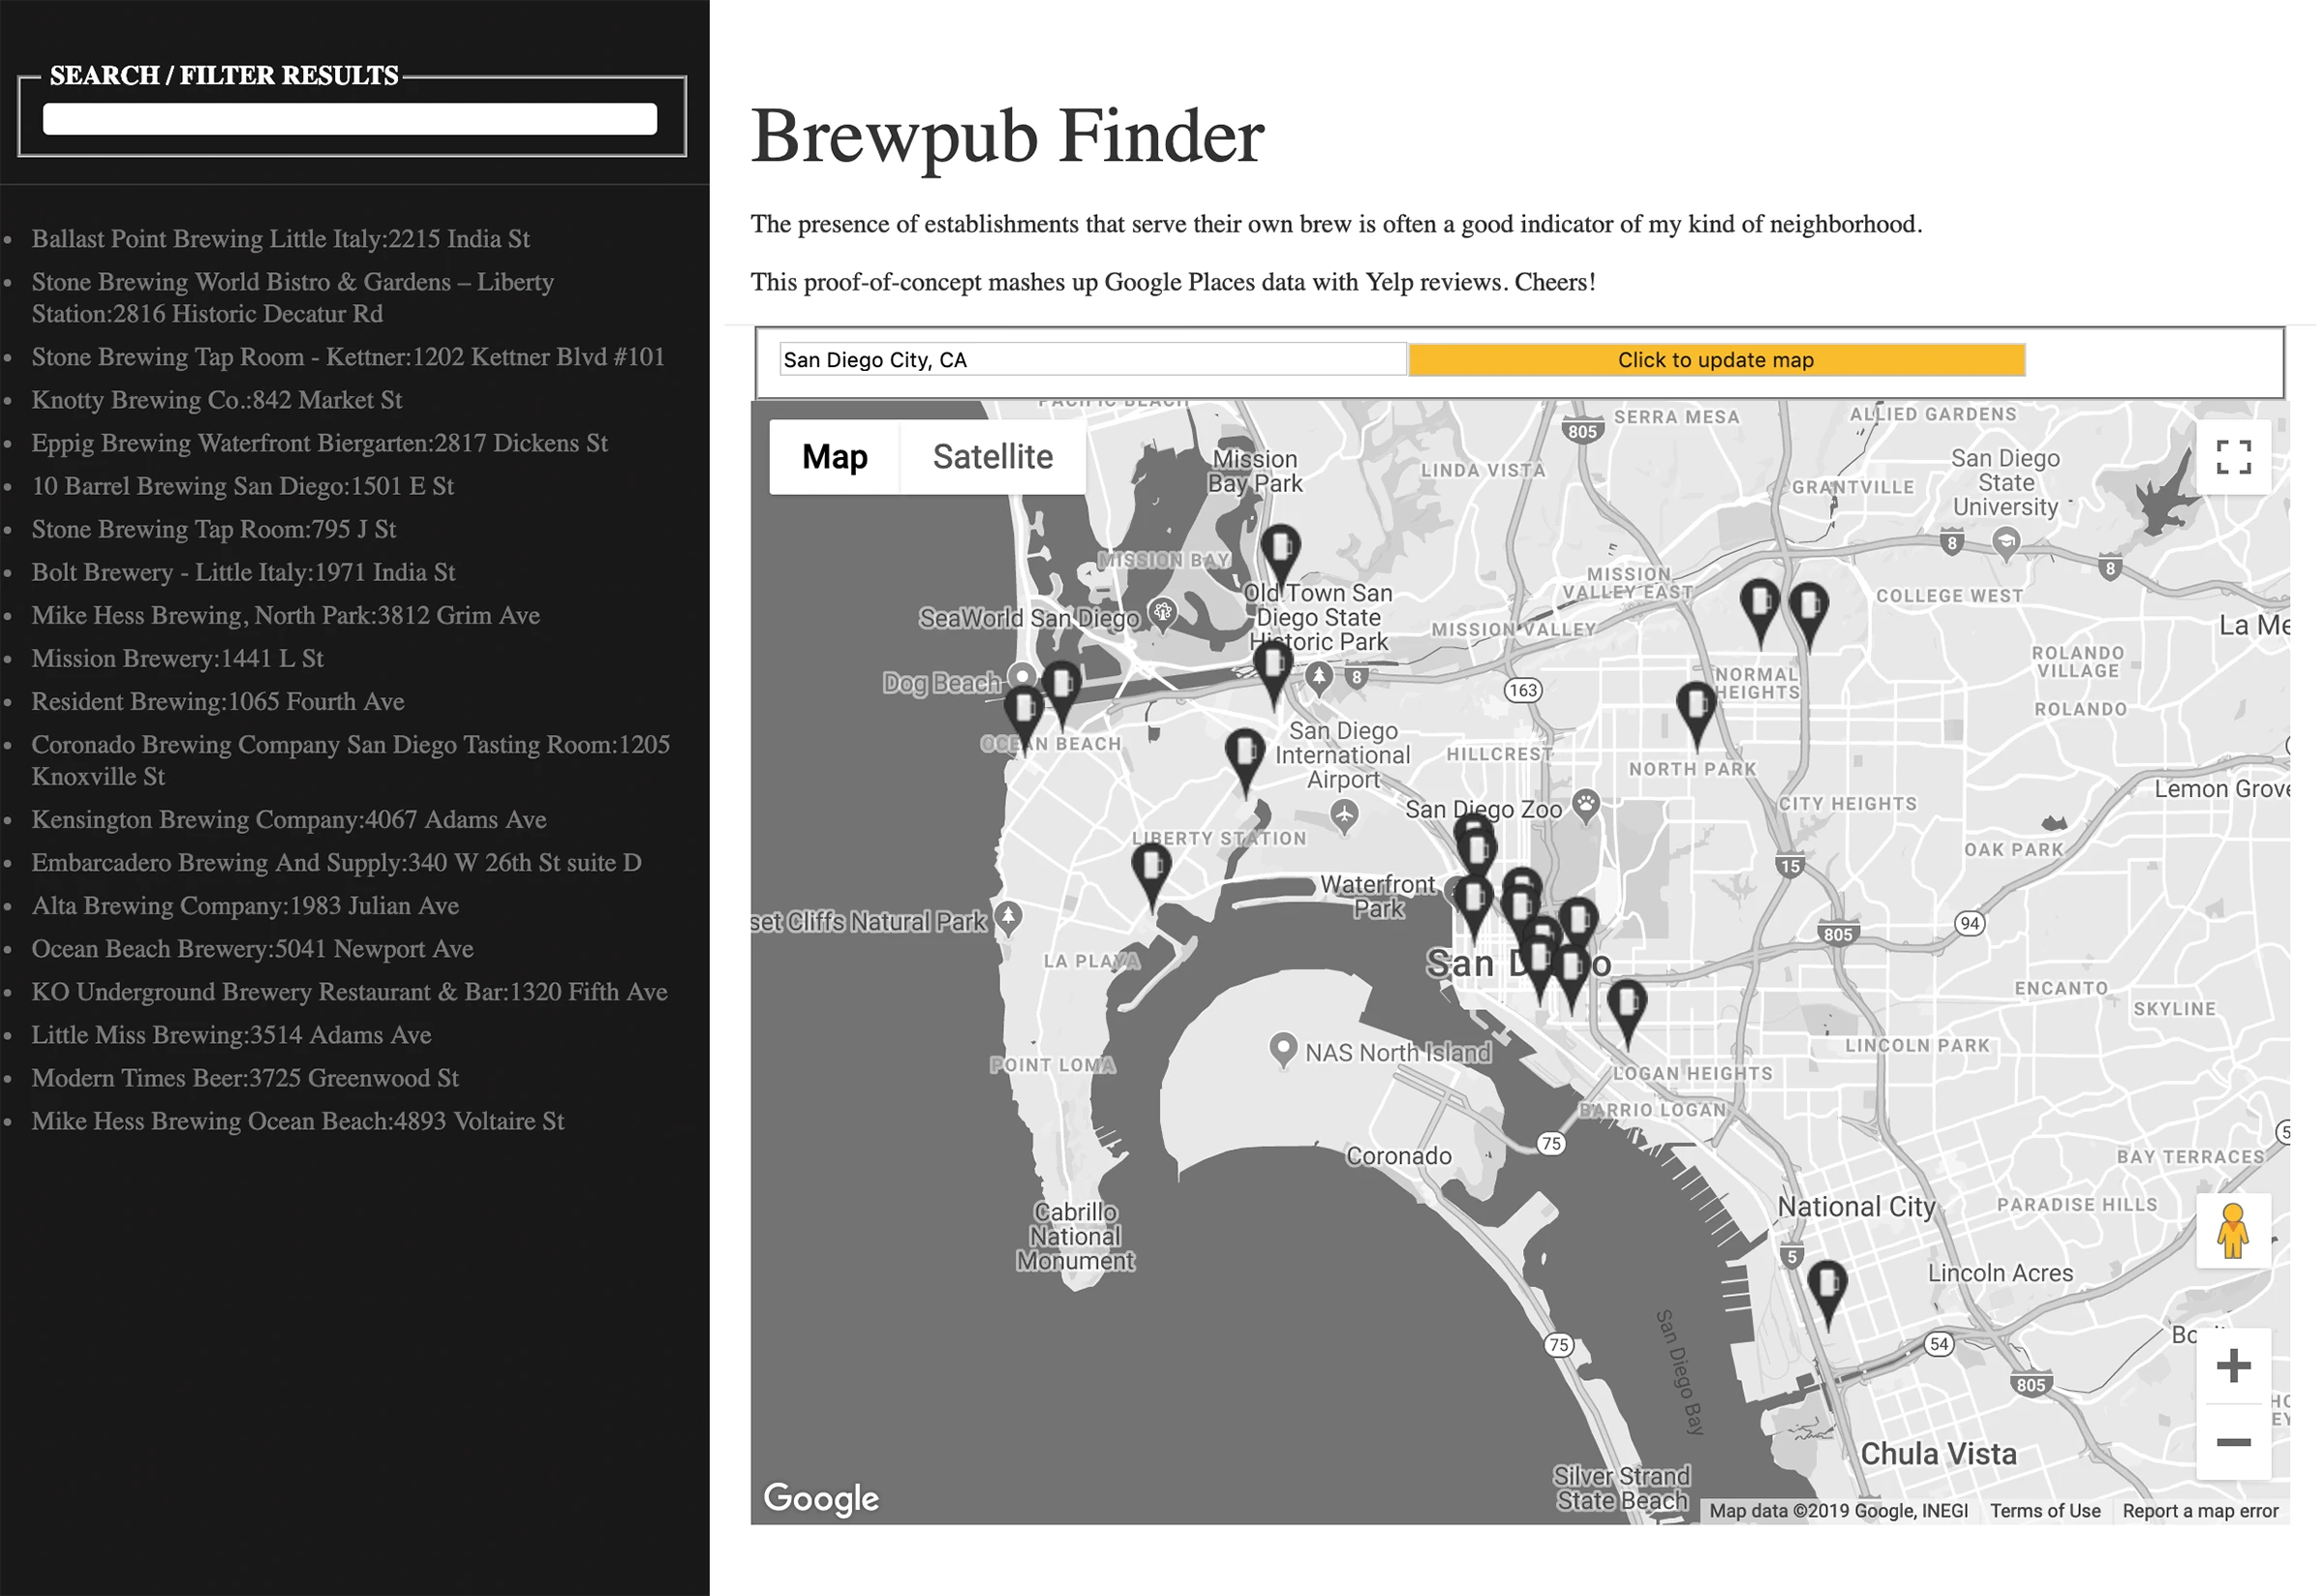 Brewpub finder app main screen shows establishments found in both Yelp and Google on a Google map.